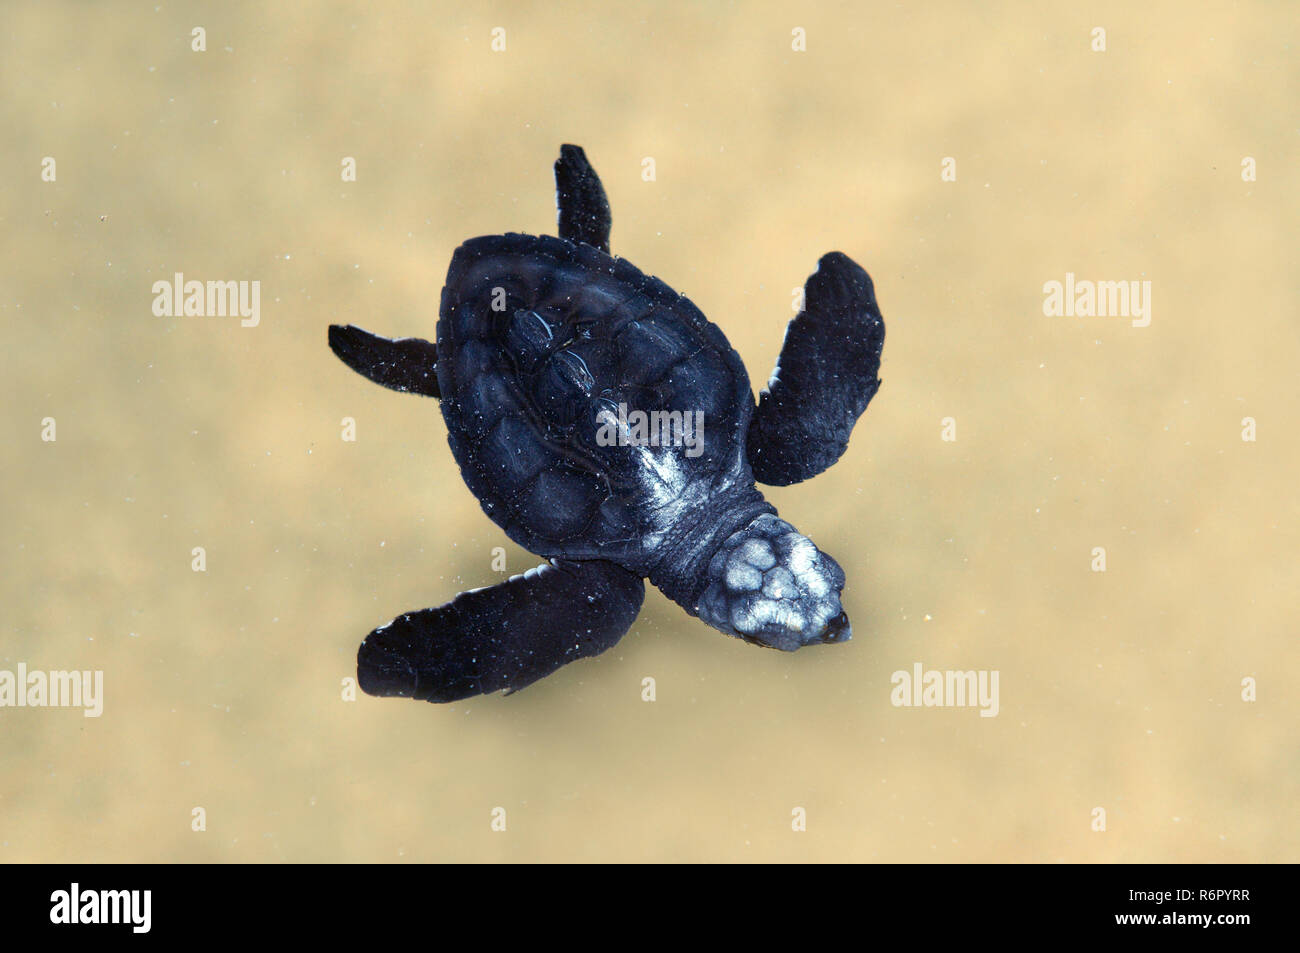 Baby Pacific ridley SEA TURTLE, olive ridley sea turtle o Ridely Oliva (Lepidochelys olivacea) nuotare in acque poco profonde, Oceano Indiano, Hikkaduwa, S Foto Stock